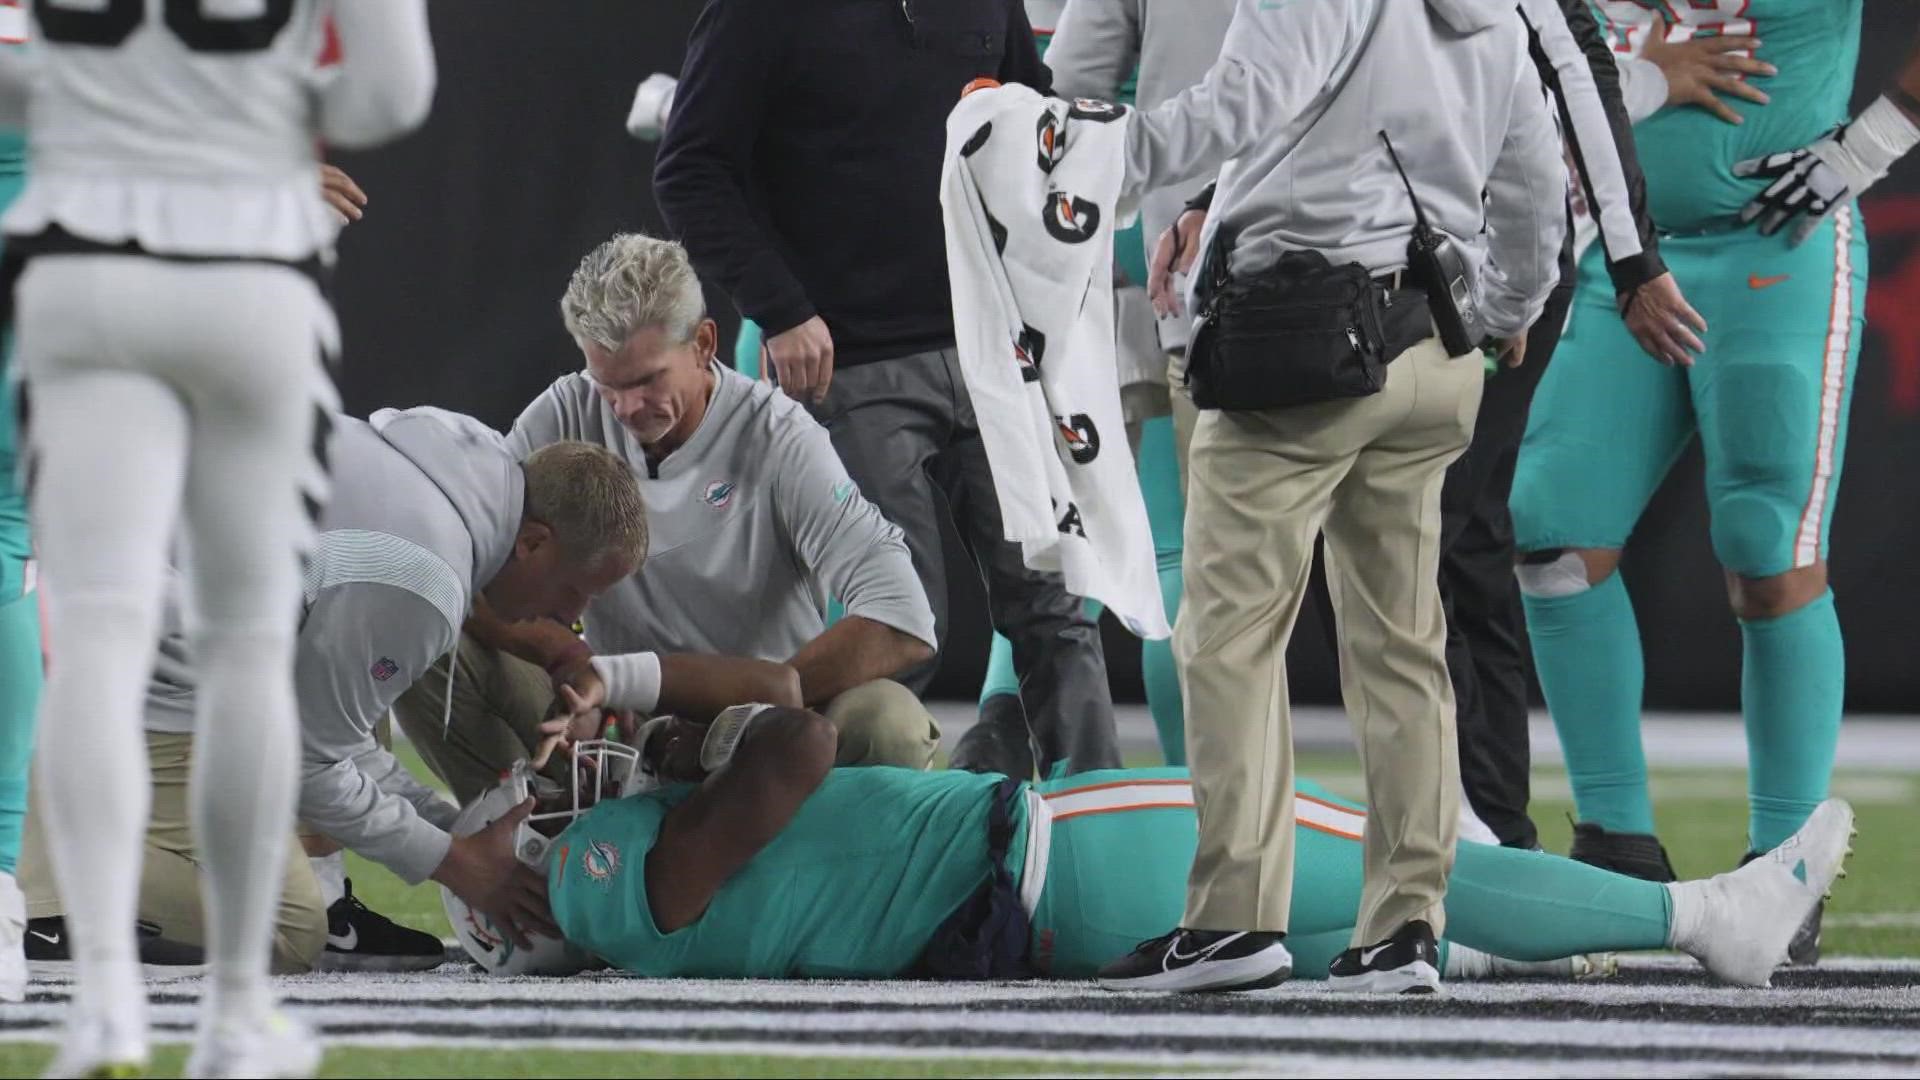 The Miami Dolphins quarterback took a hard hit and remained down for more than seven minutes before being taken off the field on a stretcher.